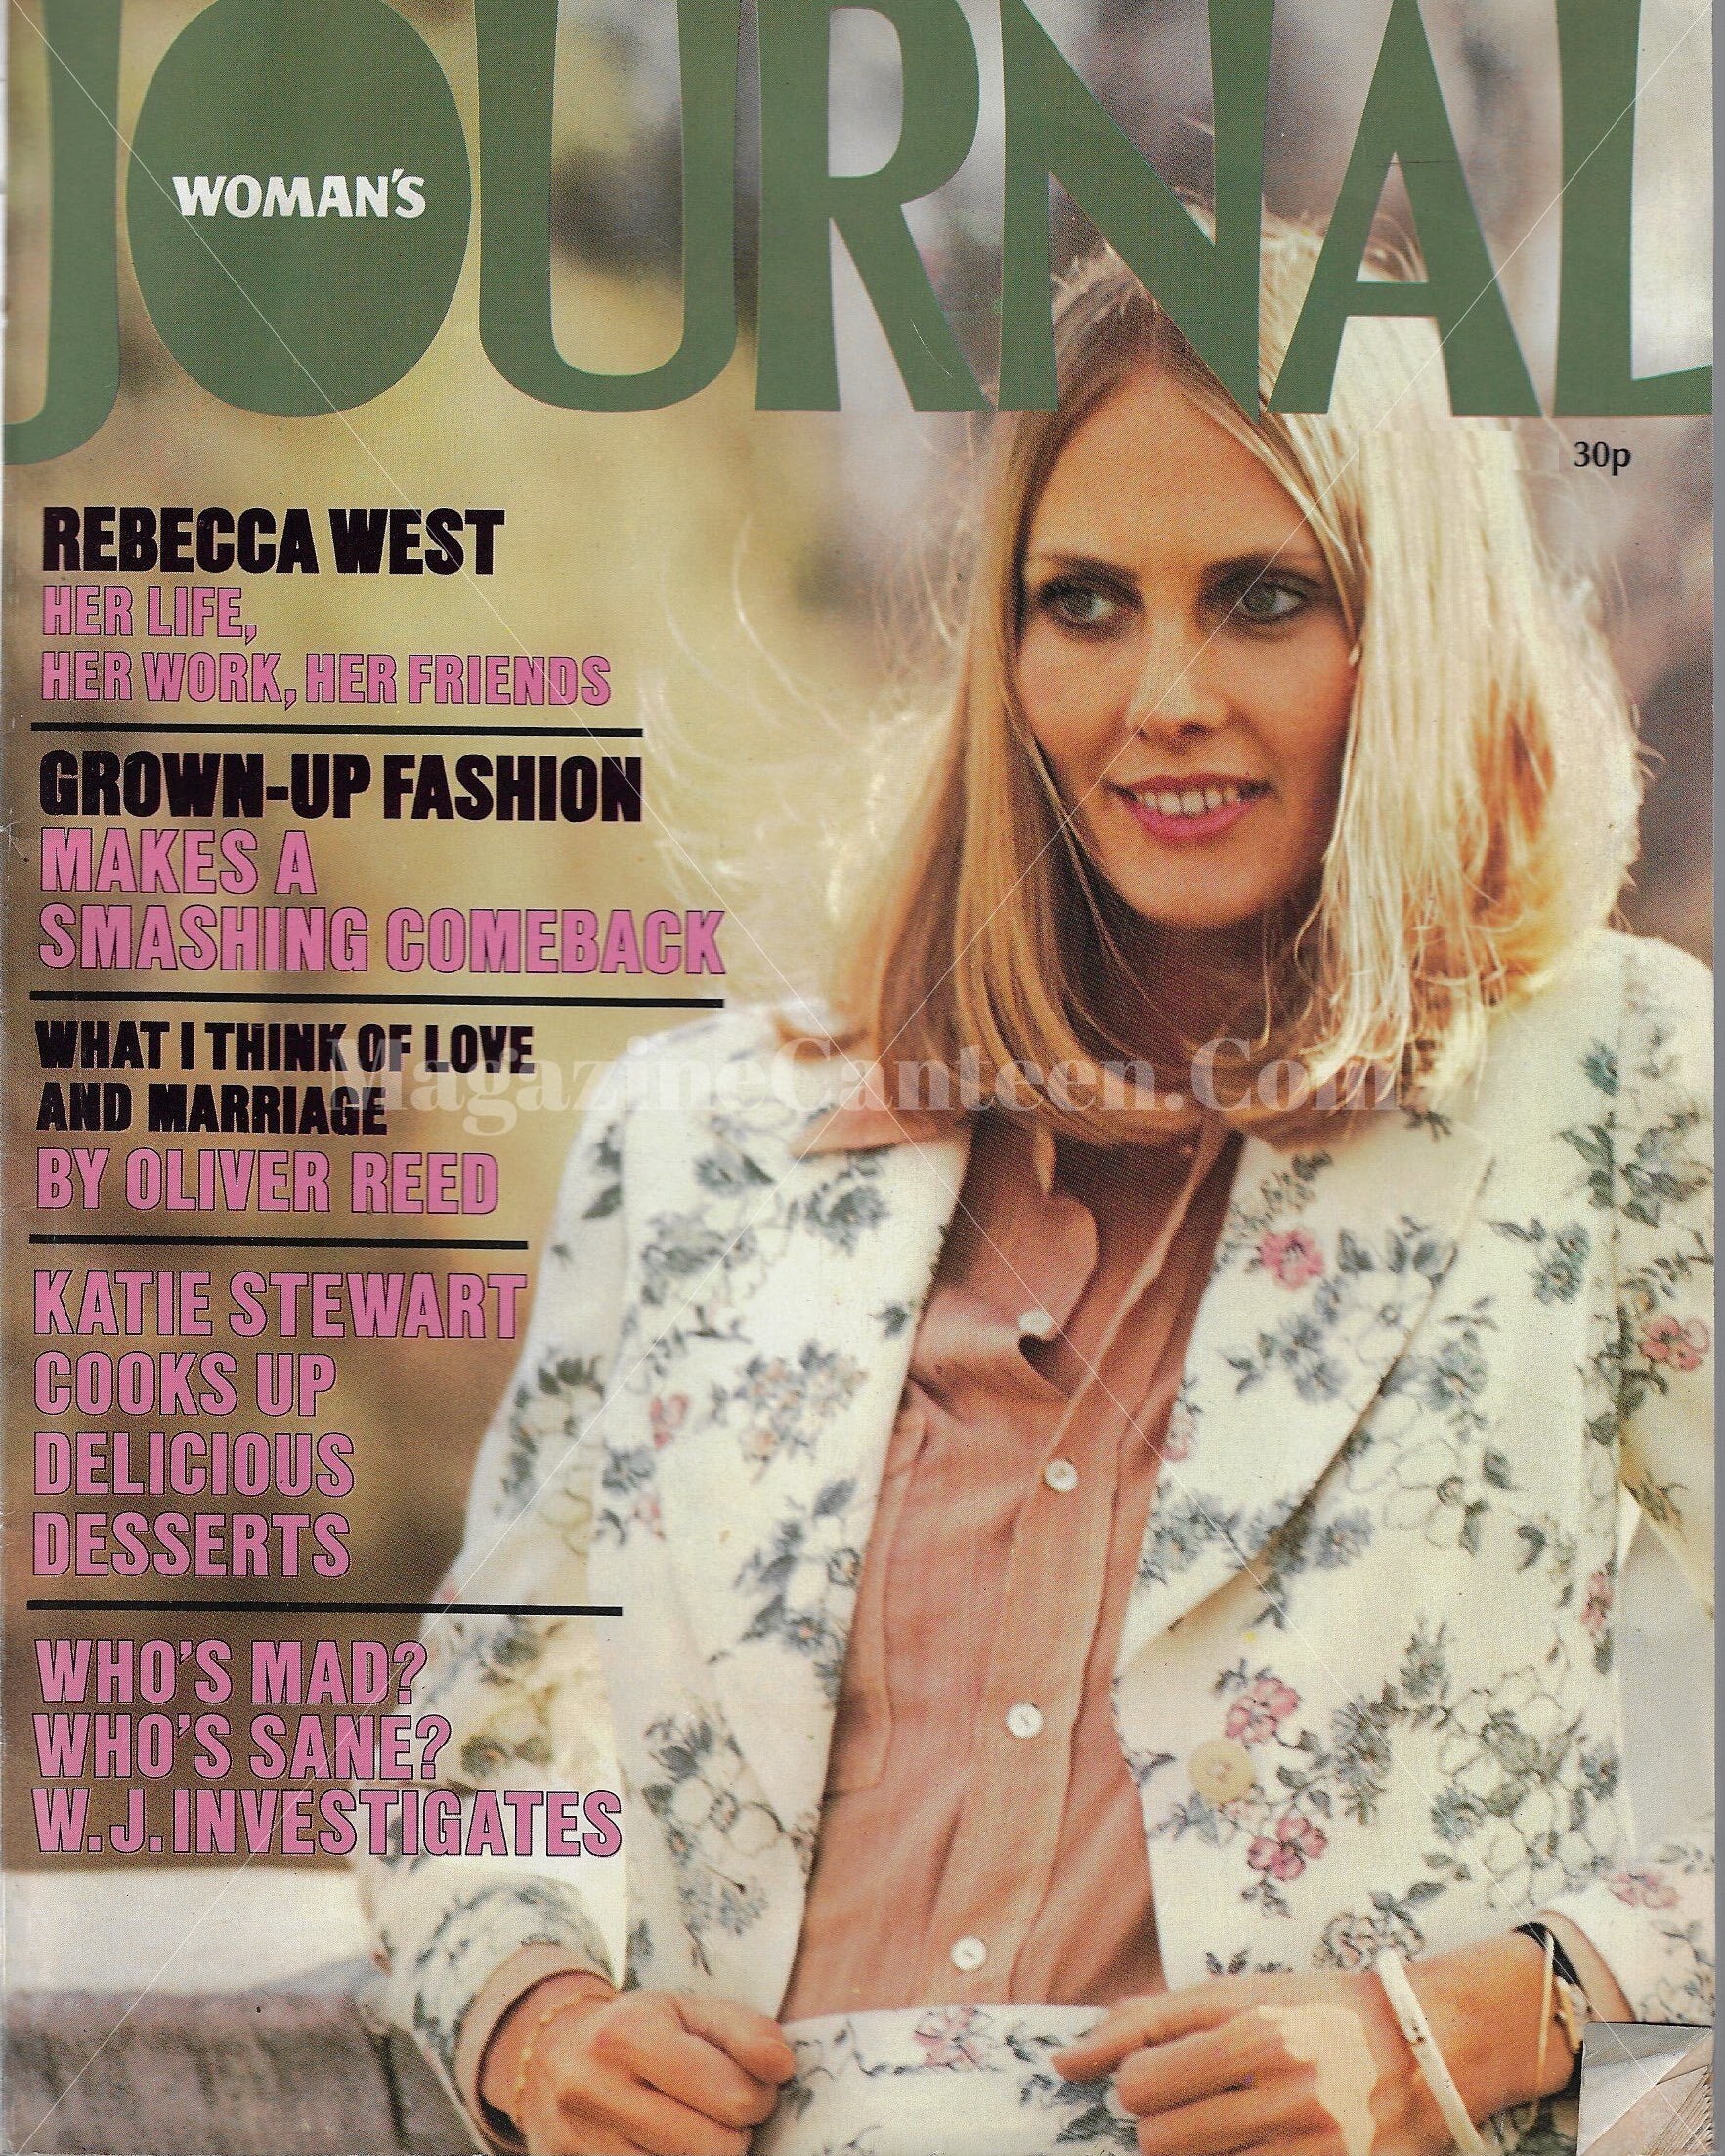 Woman's Journal Magazine - Kenneth Griffiths